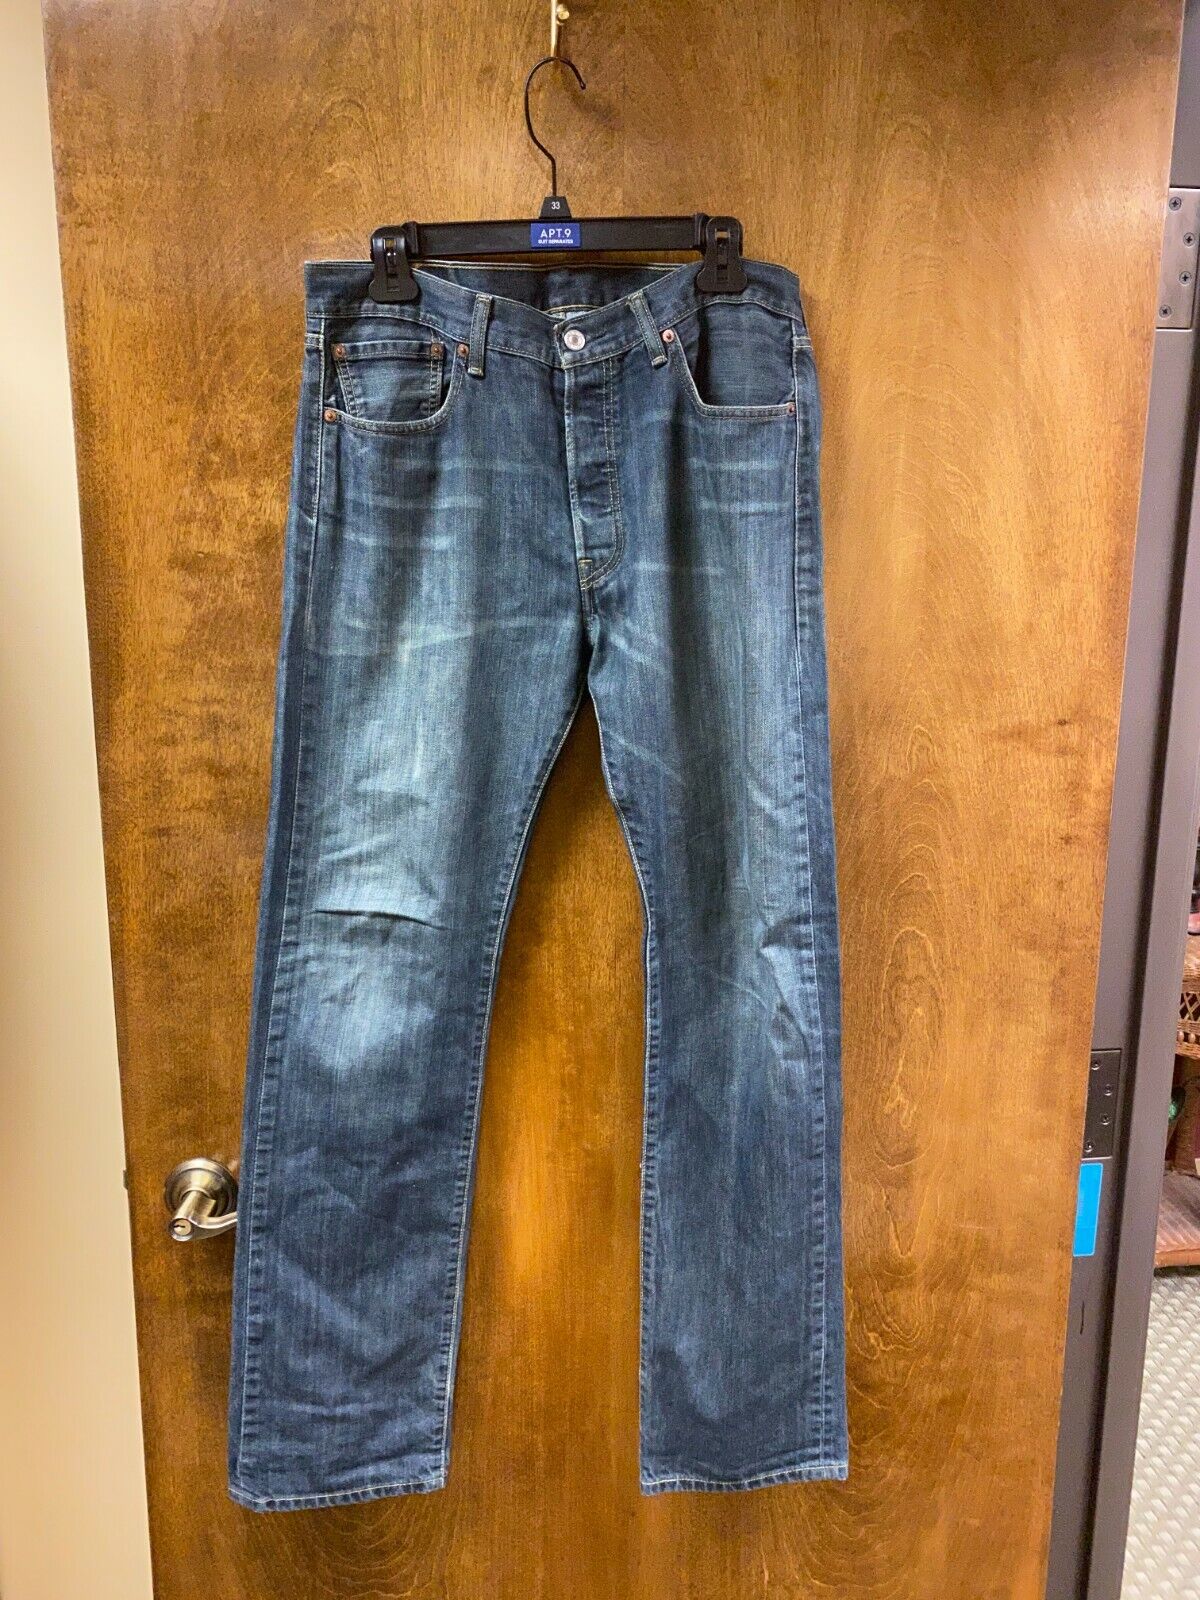 Levi Straus dark blue jeans 501. w-33. L-34. previously owned | eBay